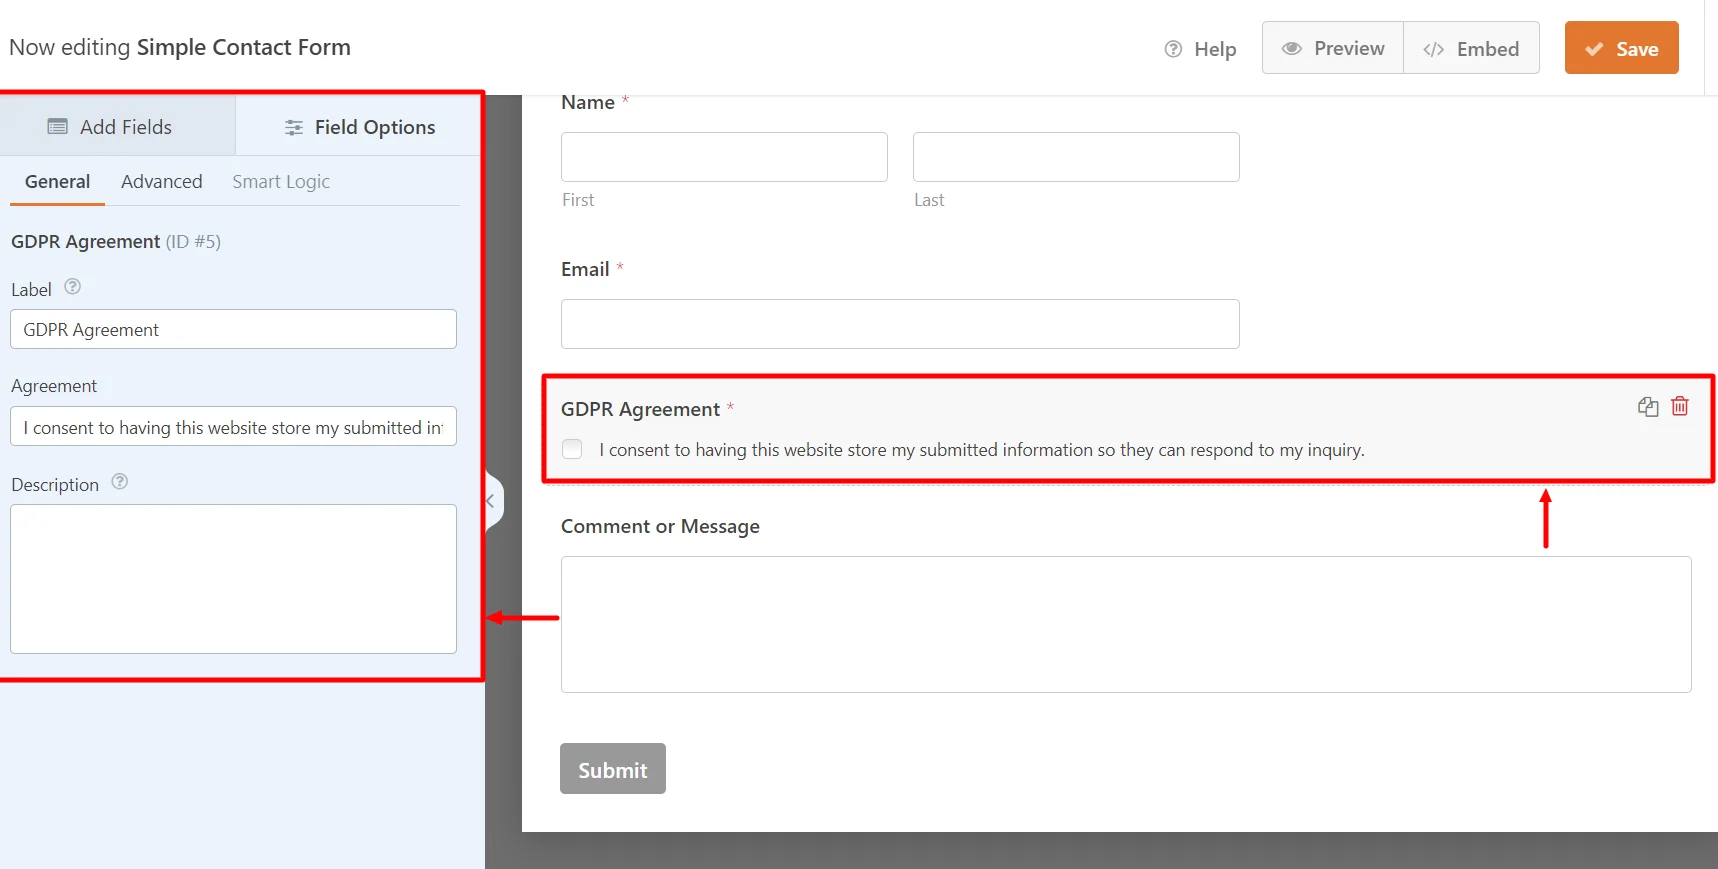 GDPR CheckBox available at teh bottom of the page